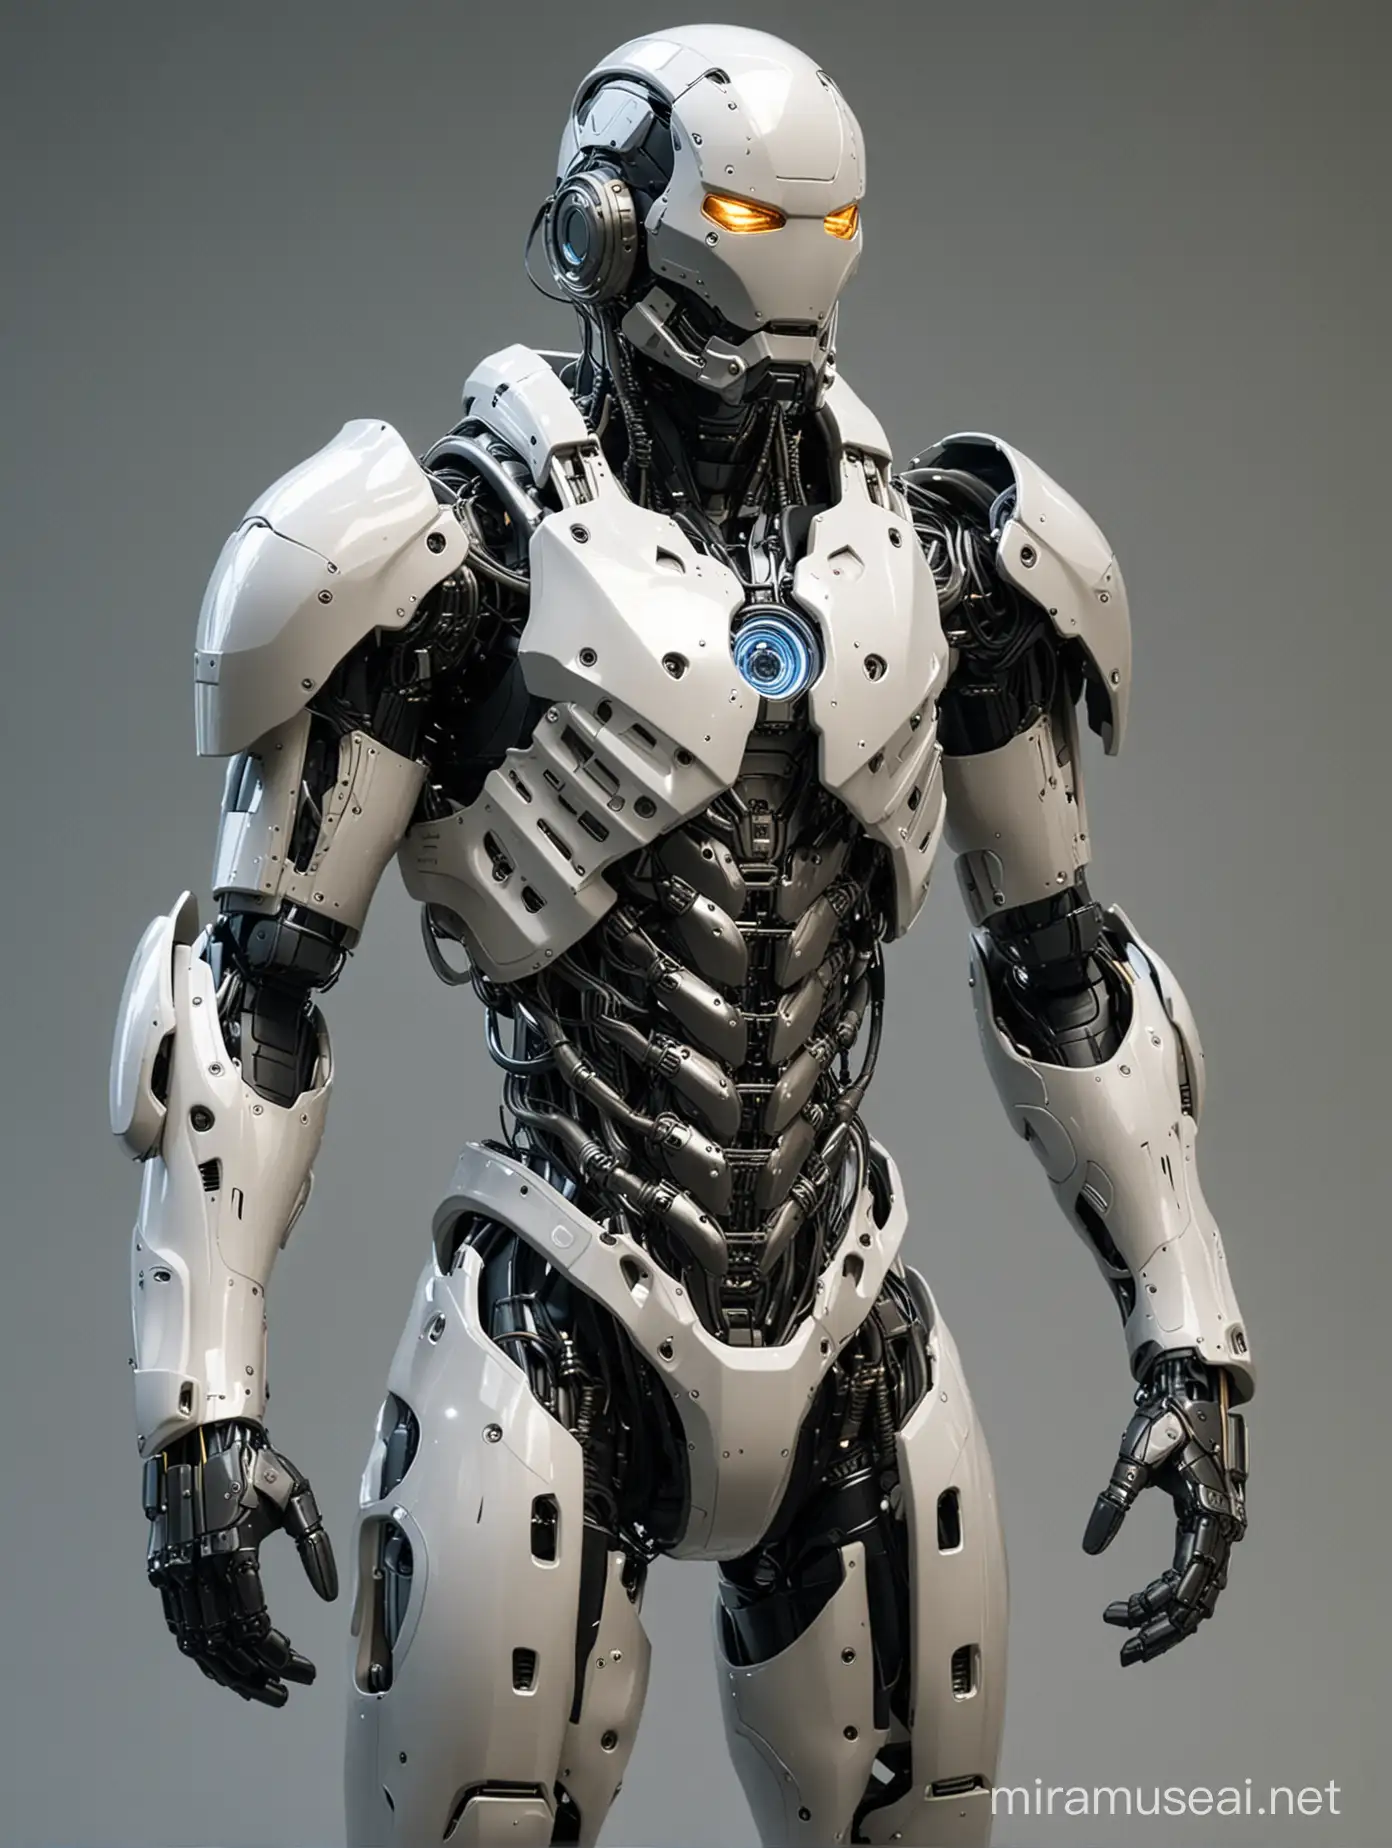 Technologic Exo-suit armour for humans